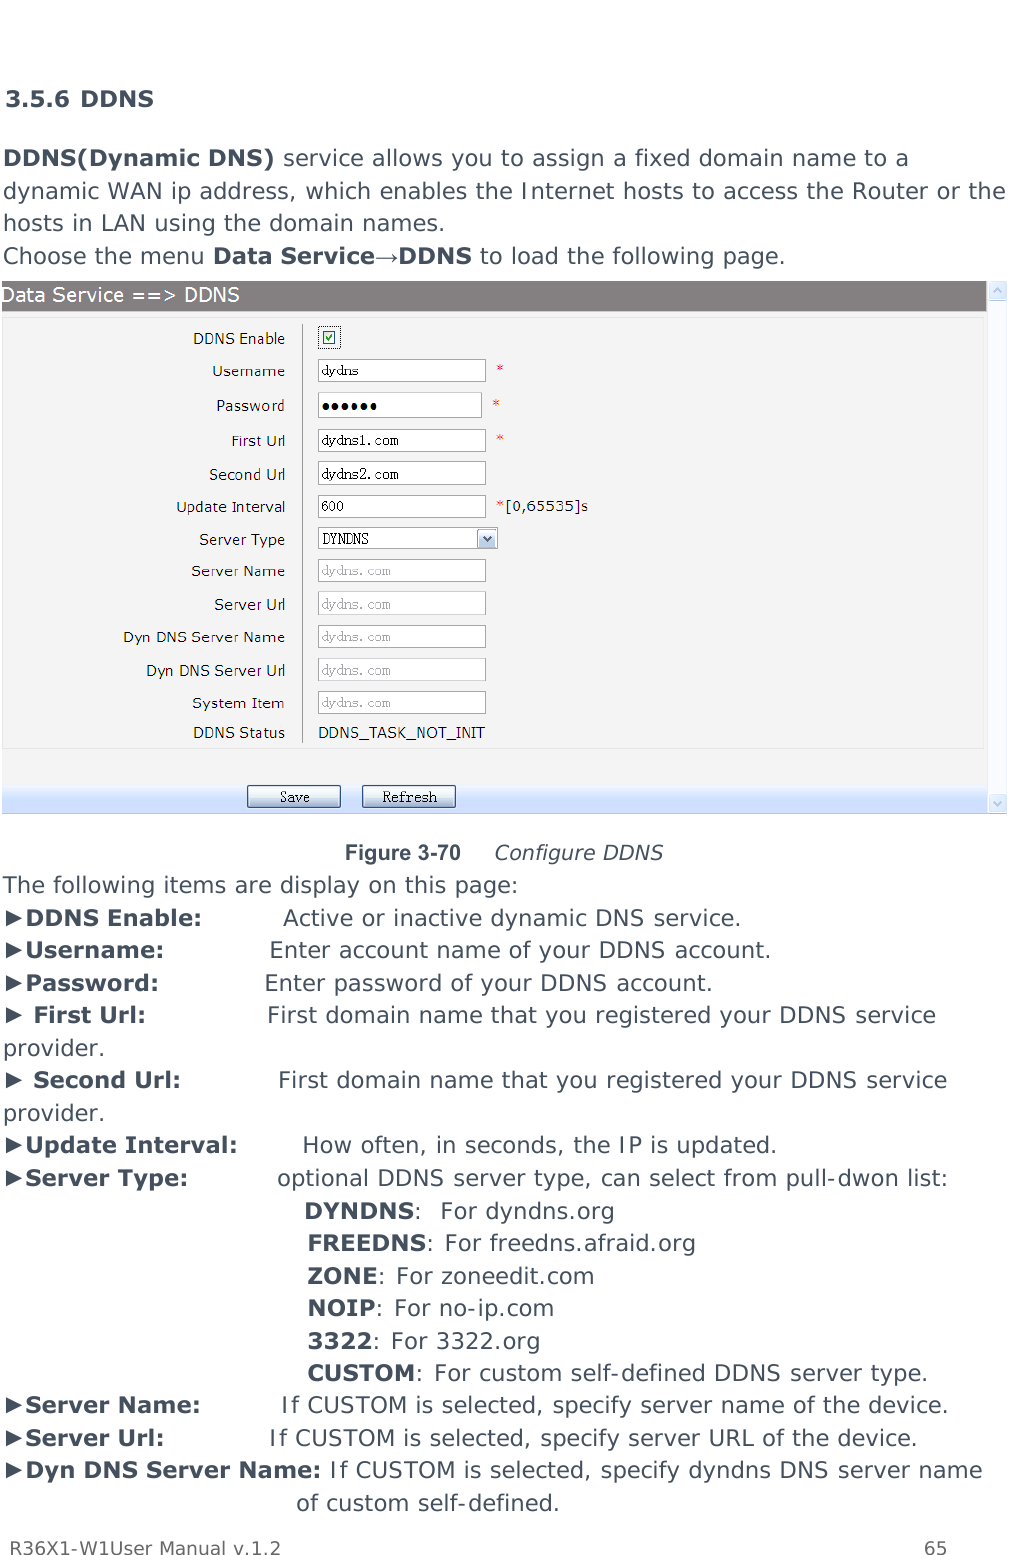           R36X1-W1User Manual v.1.2    65   3.5.6 DDNS DDNS(Dynamic DNS) service allows you to assign a fixed domain name to a dynamic WAN ip address, which enables the Internet hosts to access the Router or the hosts in LAN using the domain names. Choose the menu Data Service→DDNS to load the following page.  Figure 3-70  Configure DDNS The following items are display on this page: ►DDNS Enable:          Active or inactive dynamic DNS service. ►Username:             Enter account name of your DDNS account. ►Password:             Enter password of your DDNS account. ► First Url:               First domain name that you registered your DDNS service provider. ► Second Url:            First domain name that you registered your DDNS service provider. ►Update Interval:        How often, in seconds, the IP is updated. ►Server Type:           optional DDNS server type, can select from pull-dwon list: DYNDNS:  For dyndns.org FREEDNS: For freedns.afraid.org ZONE: For zoneedit.com  NOIP: For no-ip.com 3322: For 3322.org CUSTOM: For custom self-defined DDNS server type. ►Server Name:          If CUSTOM is selected, specify server name of the device. ►Server Url:             If CUSTOM is selected, specify server URL of the device. ►Dyn DNS Server Name: If CUSTOM is selected, specify dyndns DNS server name of custom self-defined. 